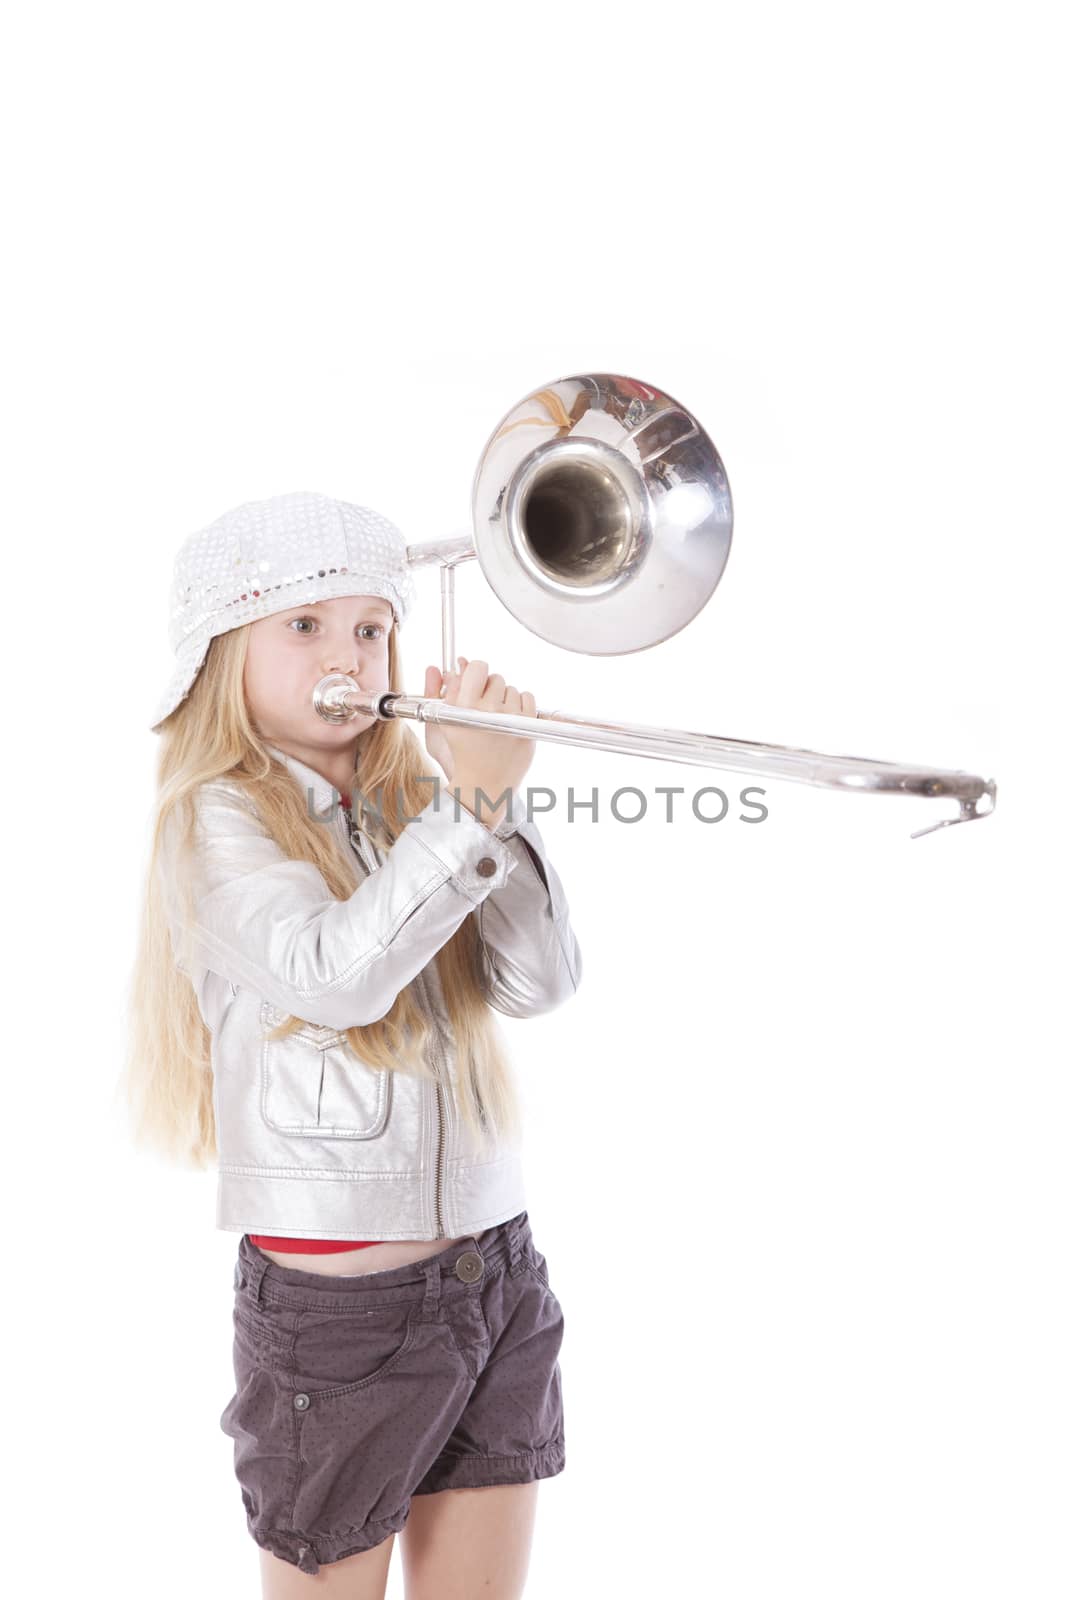 young girl playing trombone in studio against white background